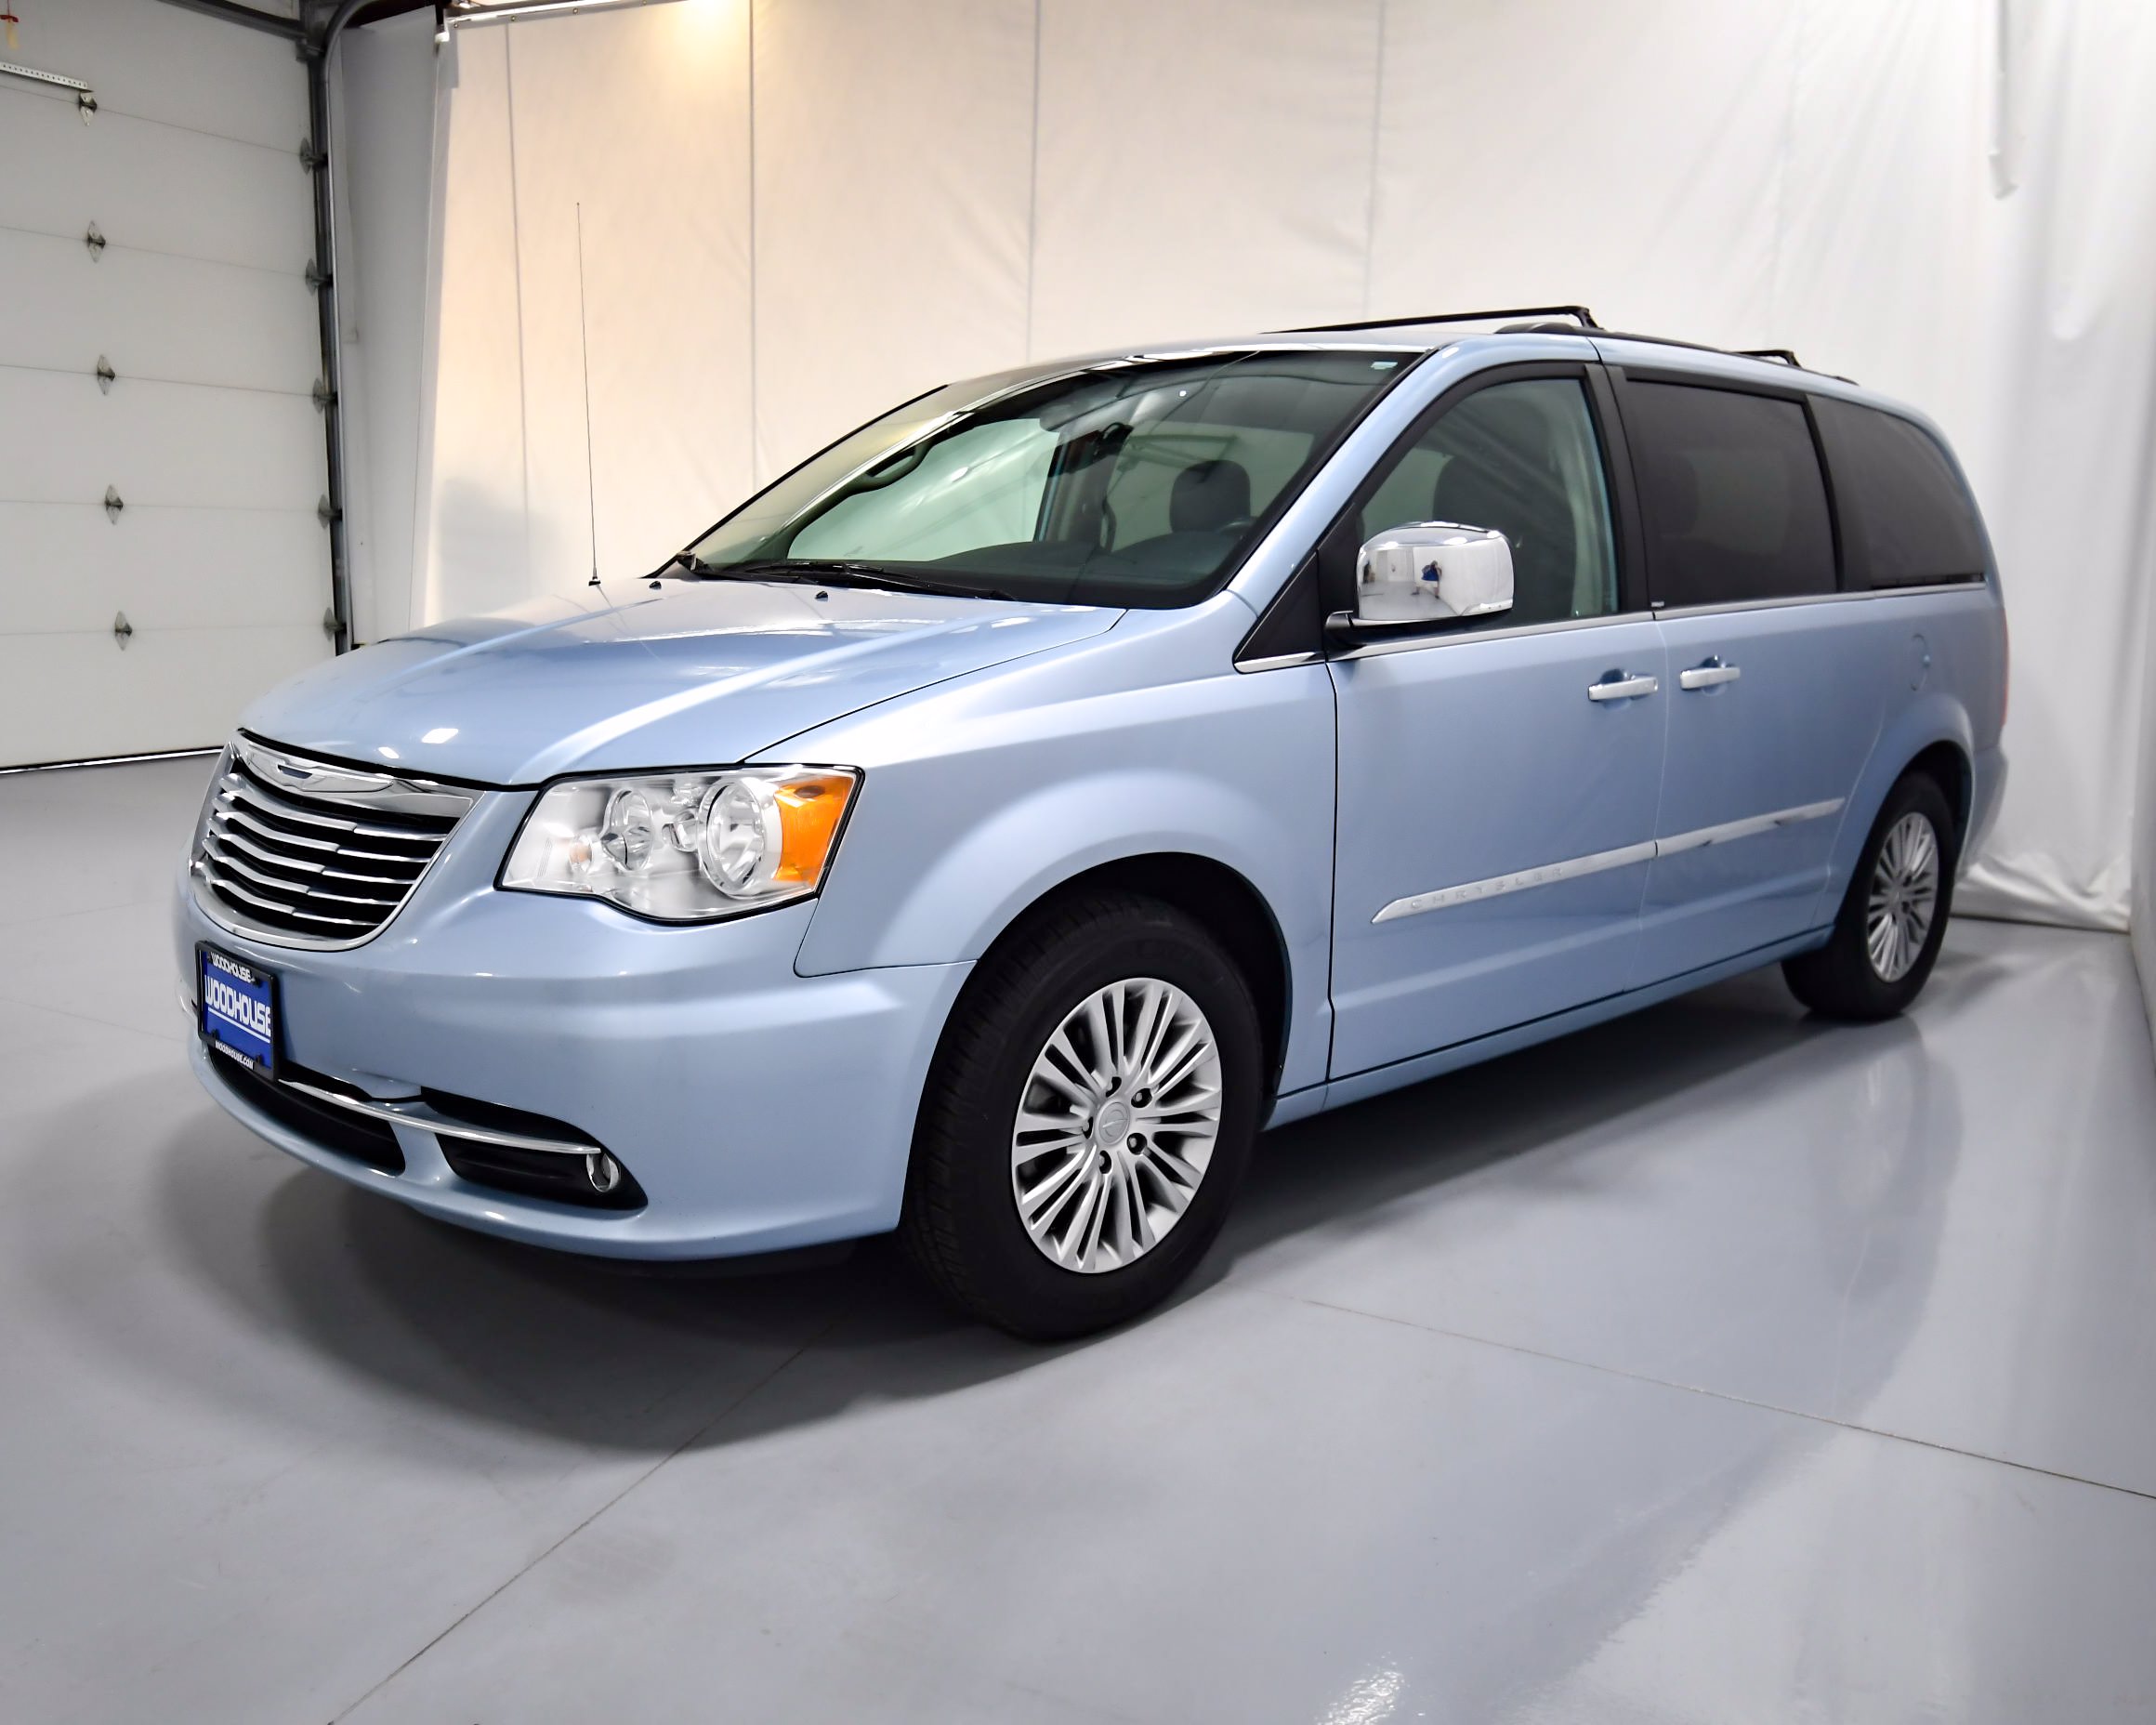 Pre-Owned 2013 Chrysler Town & Country Touring-L FWD Mini-van, Passenger Best Tires For Town And Country Van